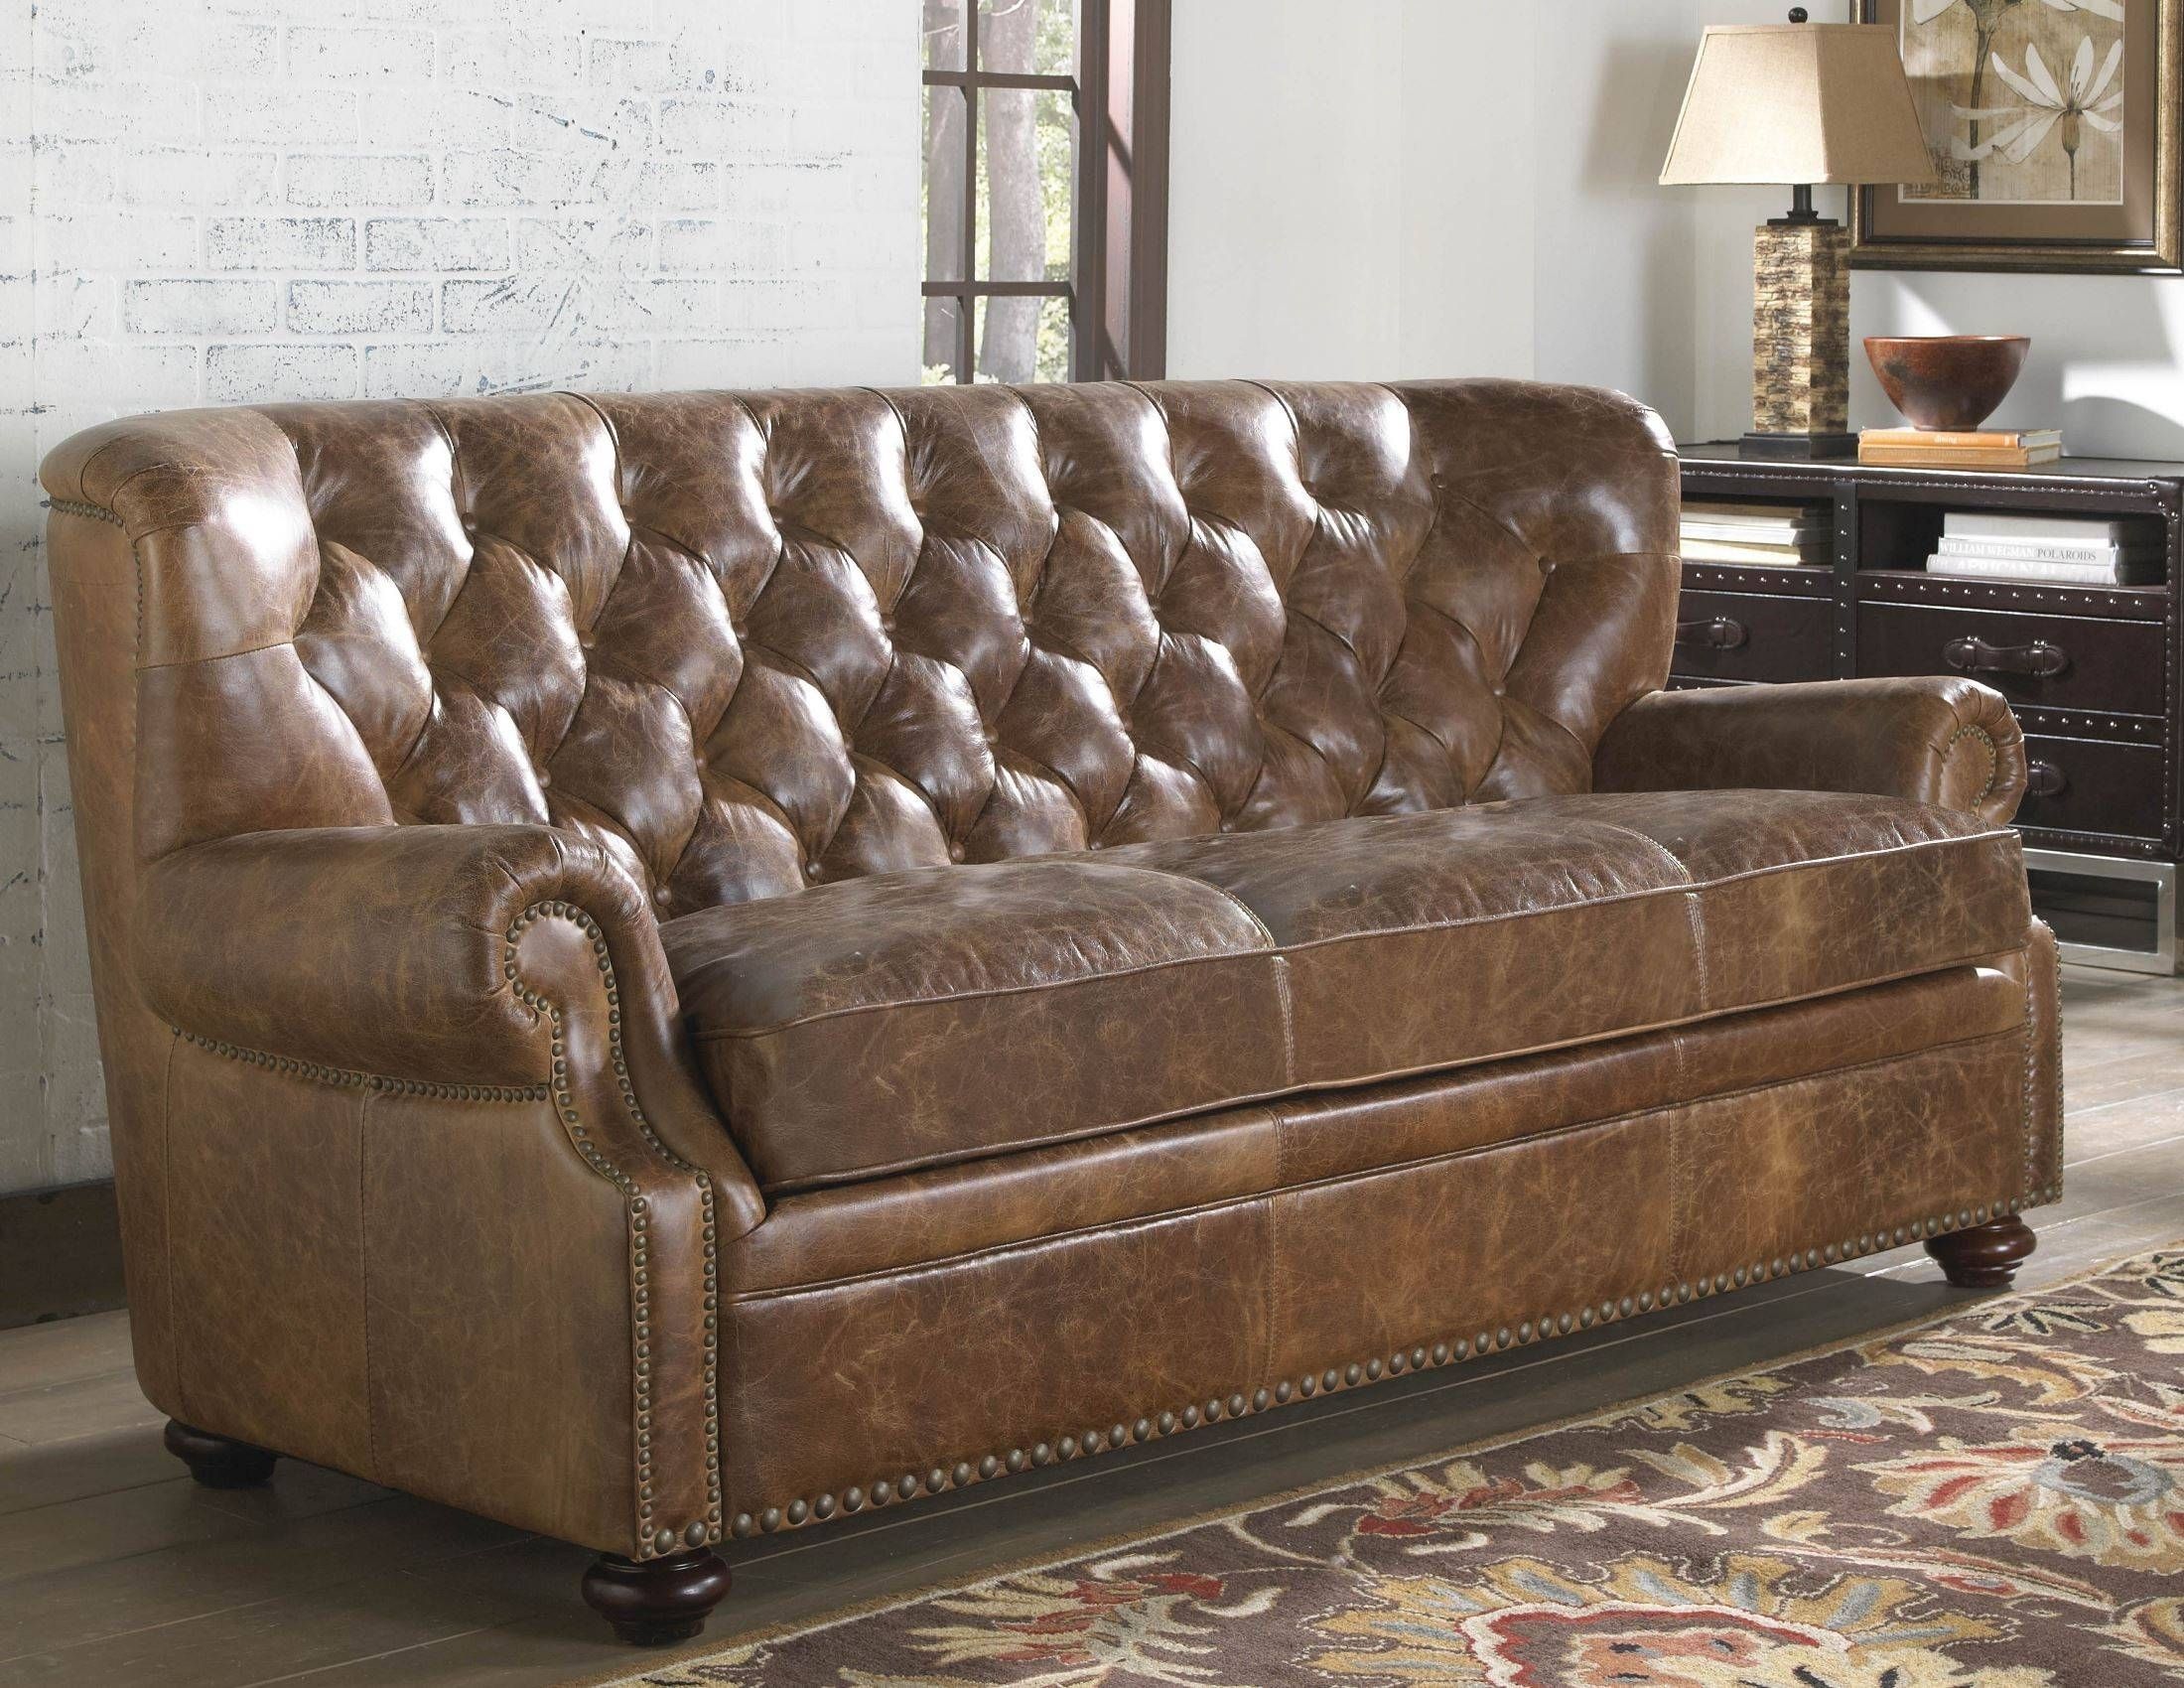 Louis Coco Brompton Leather Sofa From Lazzaro (wh 1435 30 9021 Inside Brompton Leather Sofas (View 4 of 15)